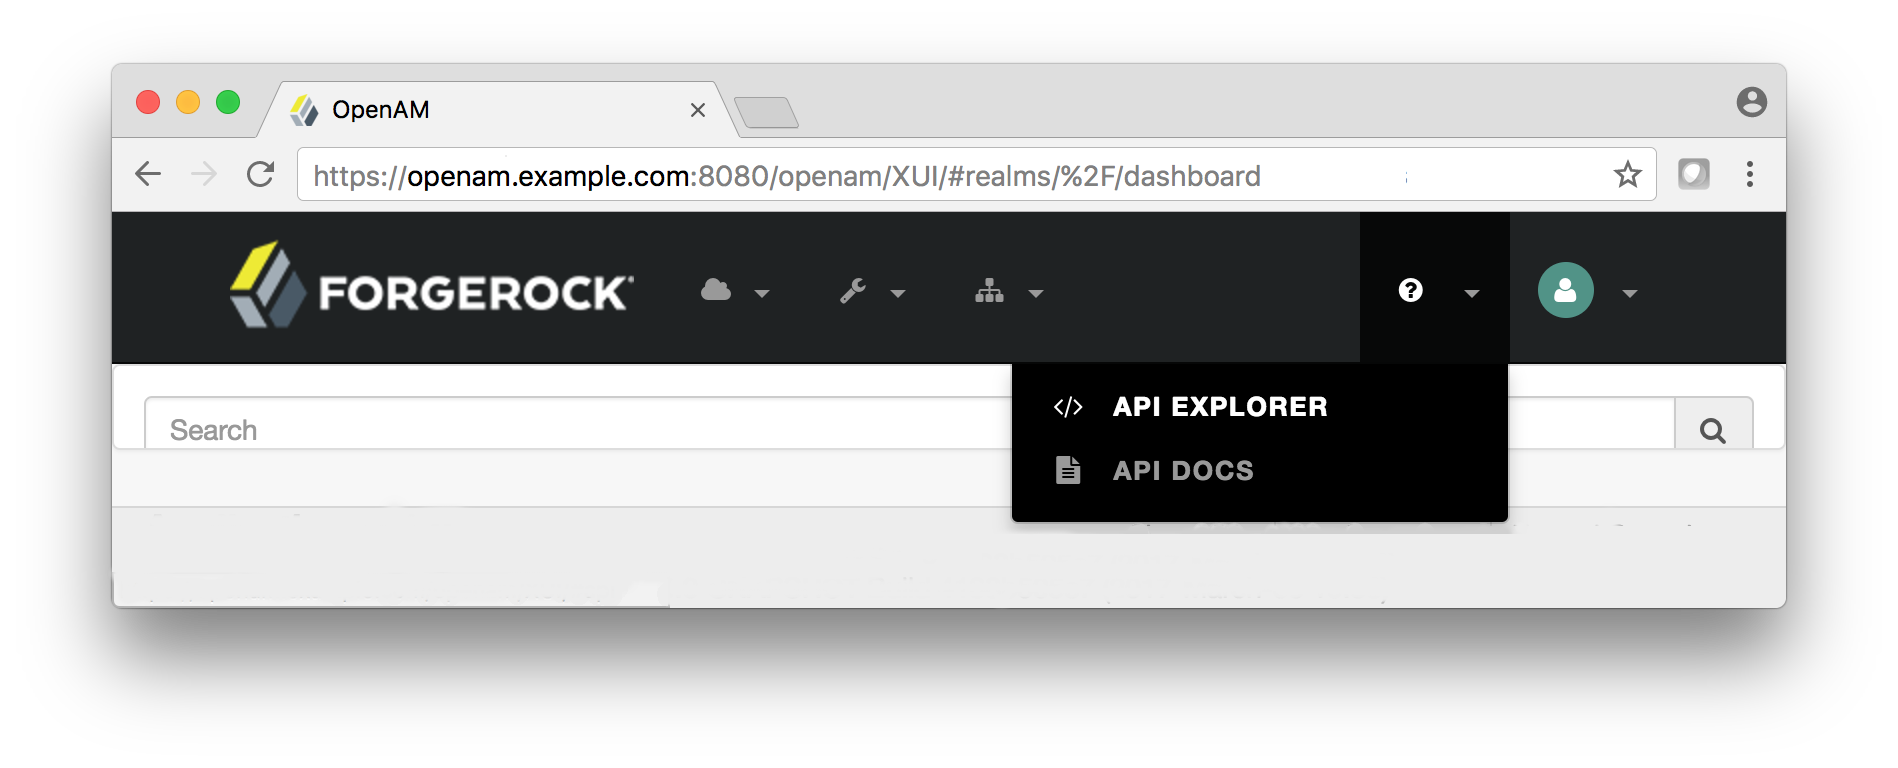 API Explorer, accessible from the help icon on the AM admin UI